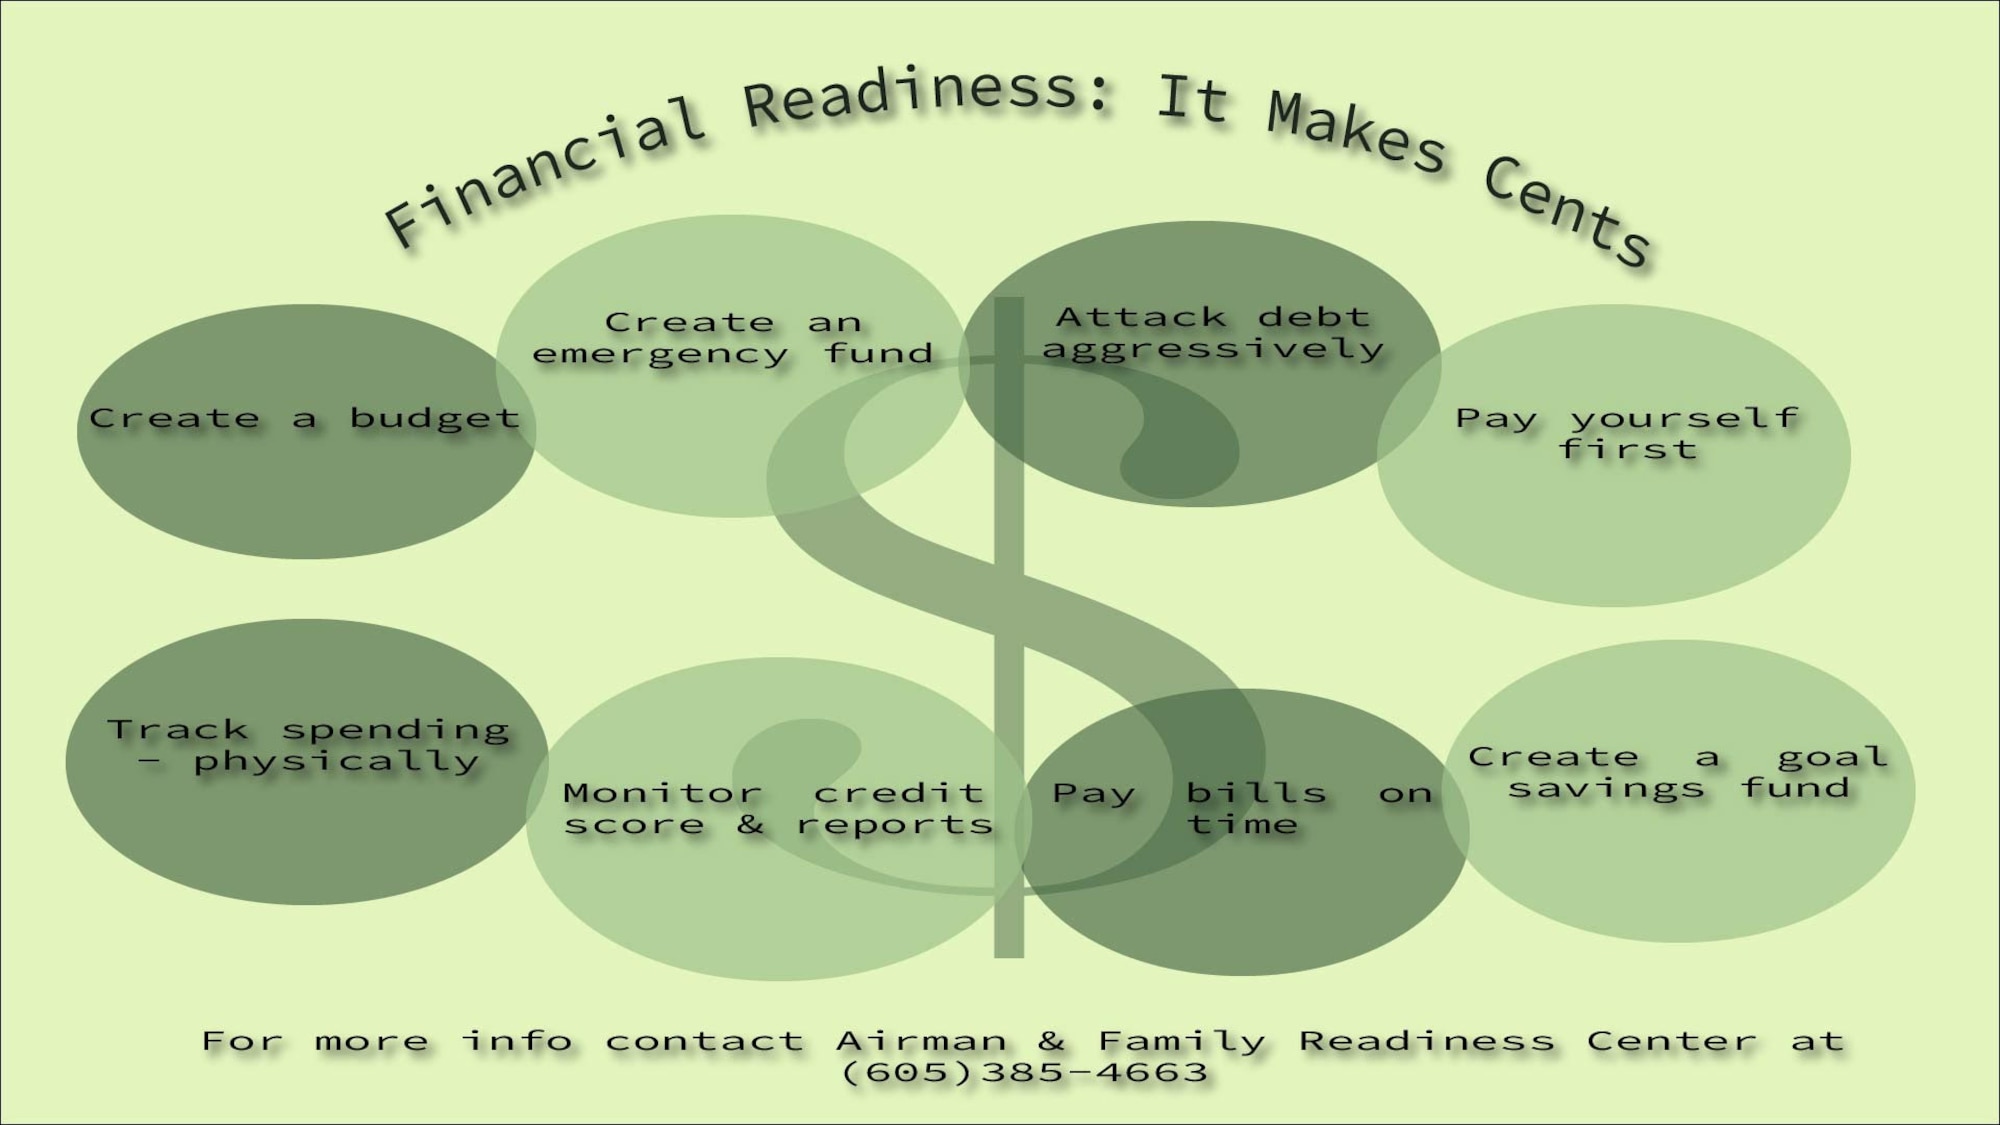 Financial readiness enables Airmen to focus on the Air Force mission without the stress of financial distractions. Financial readiness also equips Airmen with the tools to prepare for their futures. For more information, contact the Airman & Family Readiness Center at 605-385-4663. (U.S. Air Force graphic by Airman 1st Class Christina Bennett)